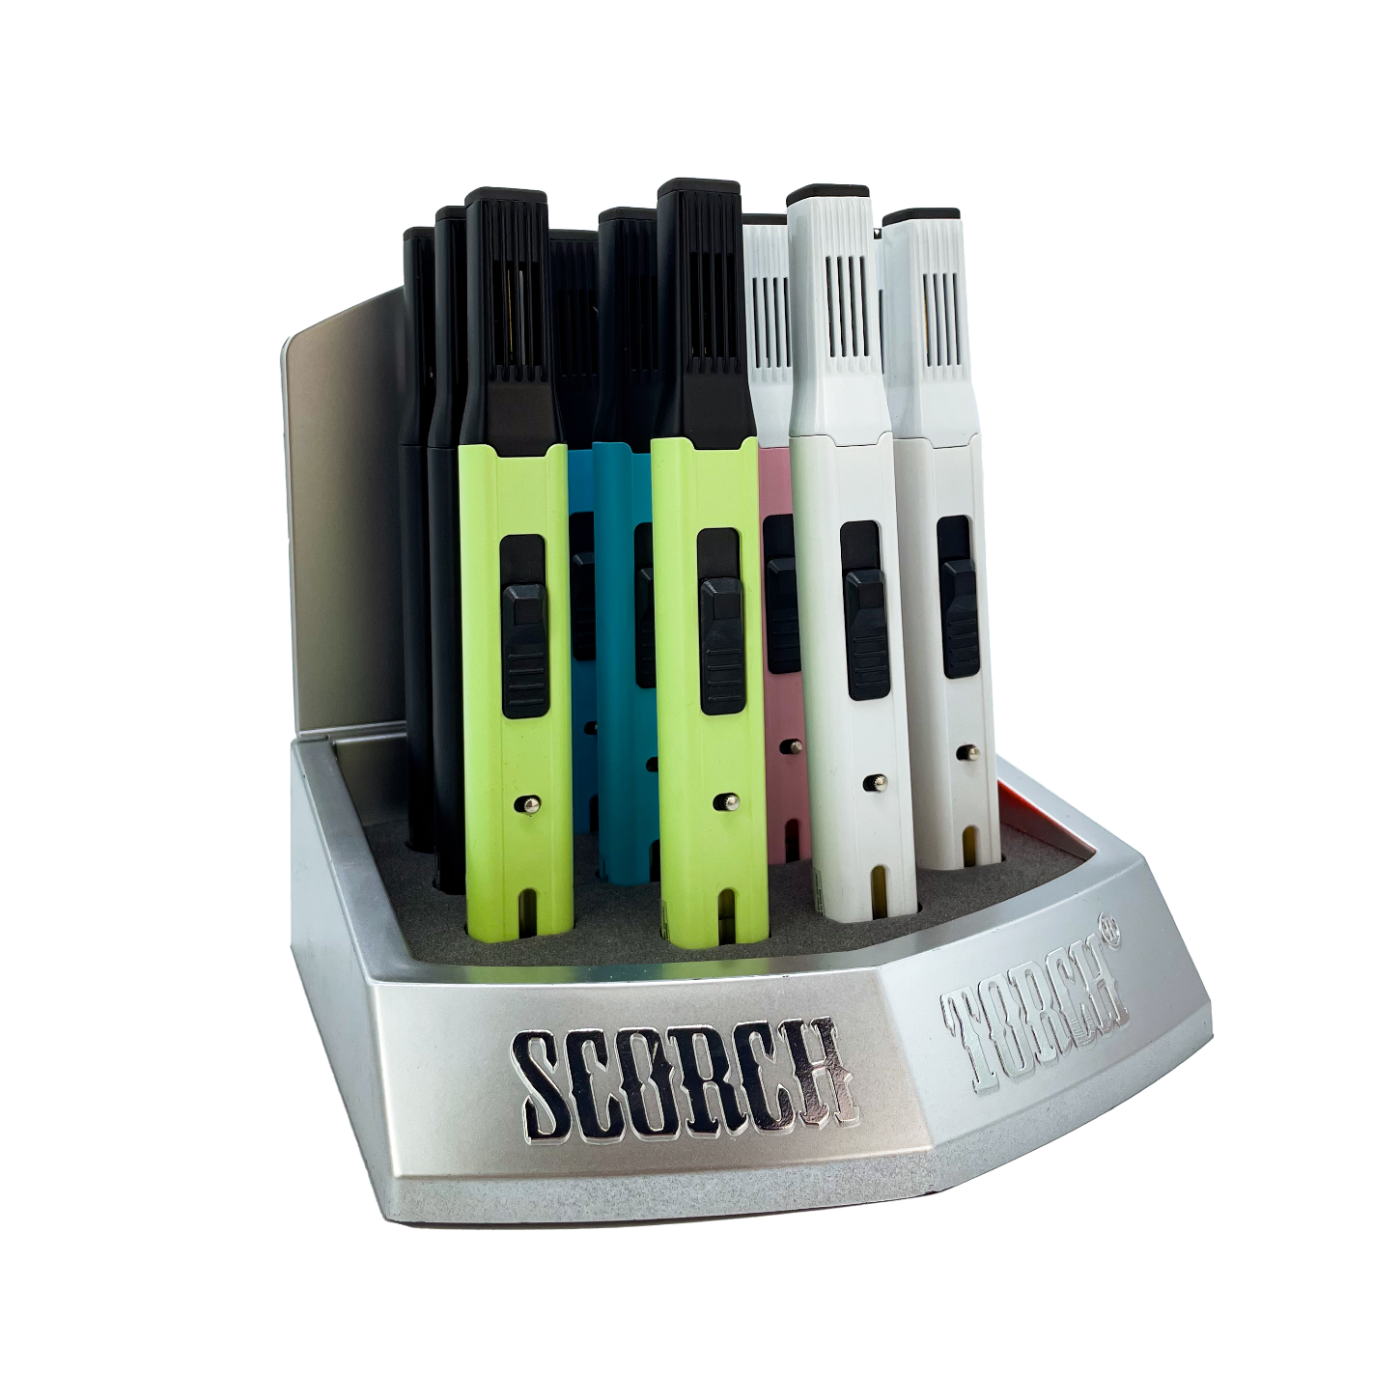 Scorch Torch - Pencil Torch w/Hold Button & Screen 12pk Display